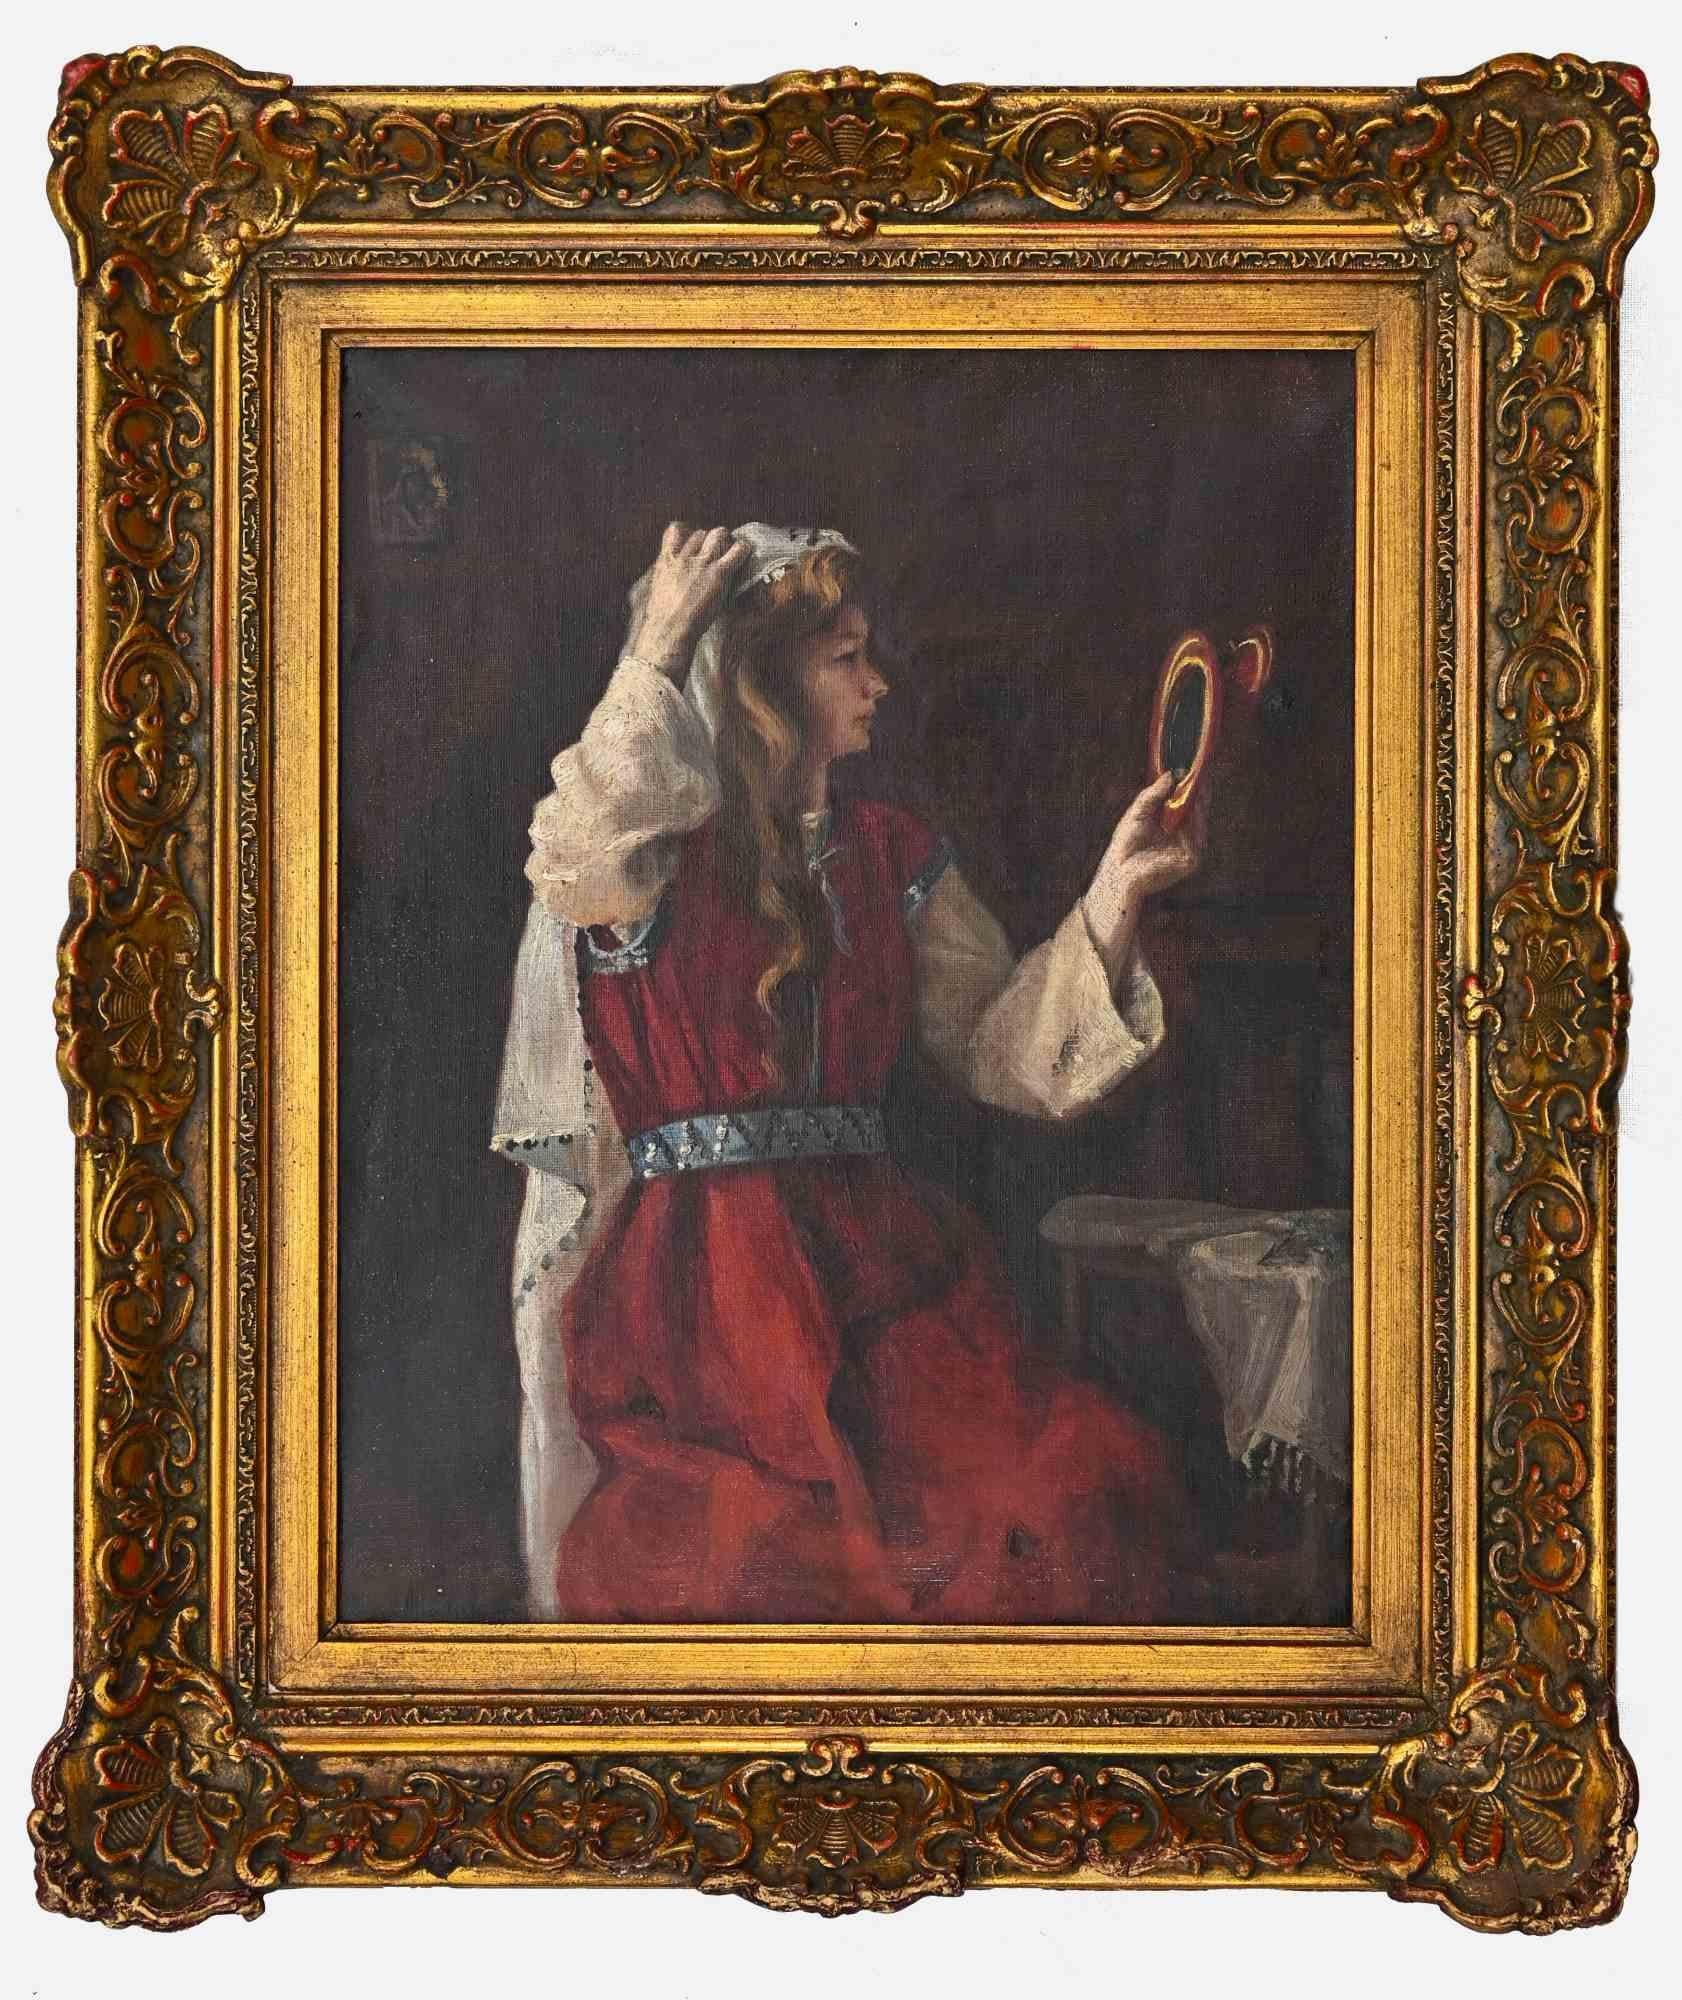 A Young Oriental Woman Looking at the Mirror-Oil on Canvas - 19th Century